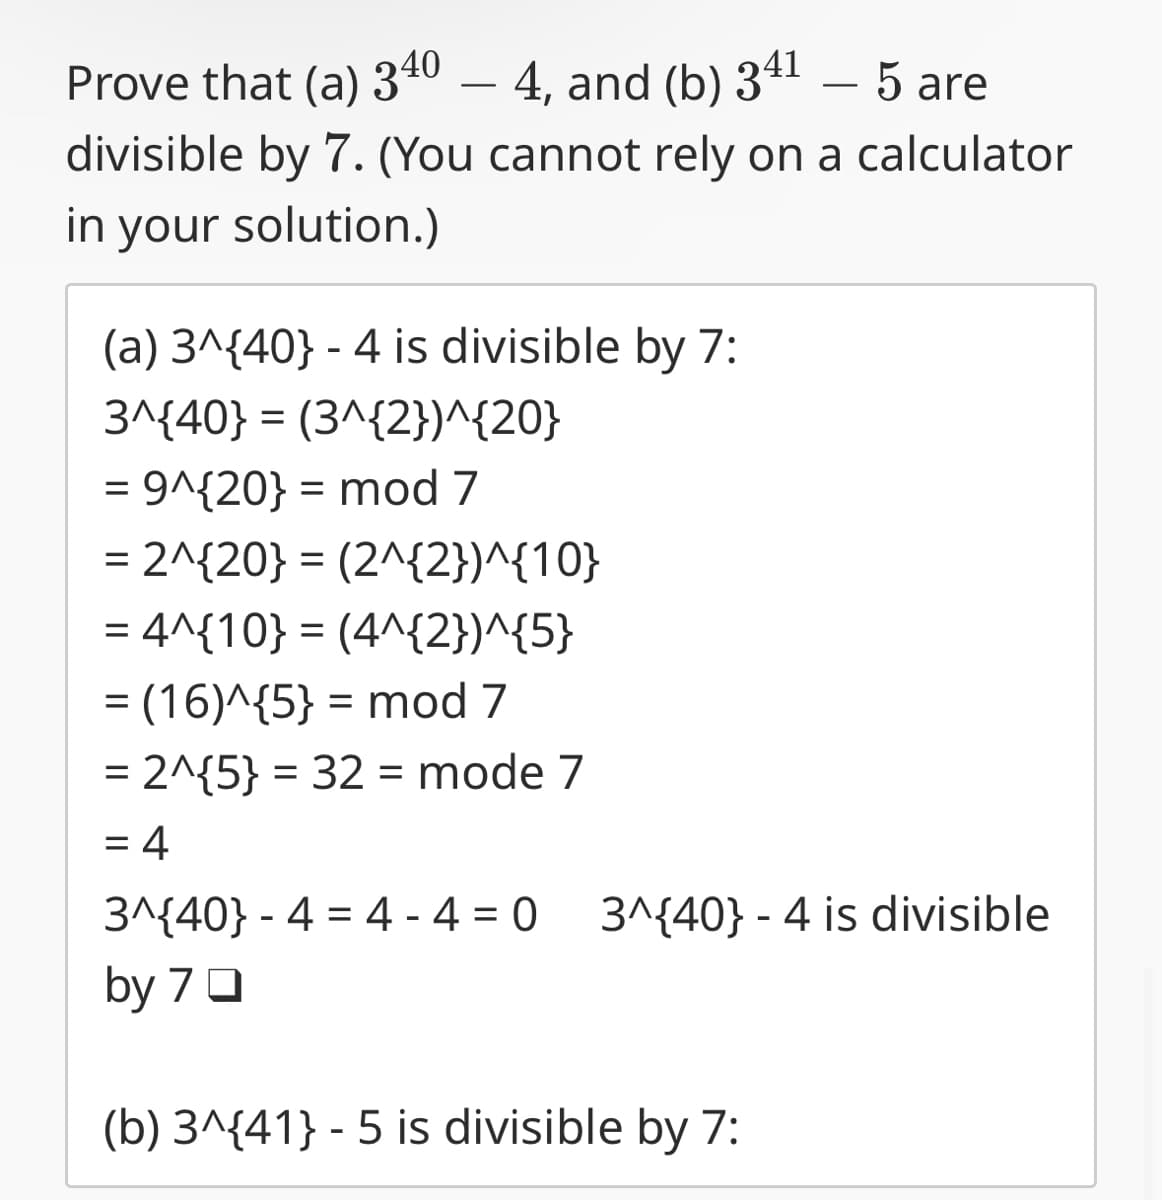 Prove that (a) 340 - 4, and (b) 341 - 5 are
divisible by 7. (You cannot rely on a calculator
in your solution.)
(a) 3^{40} - 4 is divisible by 7:
3^{40} = (3^{2})^{20}
= 9^{20} = mod 7
= 2^{20} = (2^{2})^{10}
= 4^{10} = (4^{2})^{5}
= (16)^{5} = mod 7
= 2^{5} = 32 = mode 7
= 4
3^{40} - 4 = 4-4=0
3^{40} - 4 is divisible
by 70
(b) 3^{41} - 5 is divisible by 7: